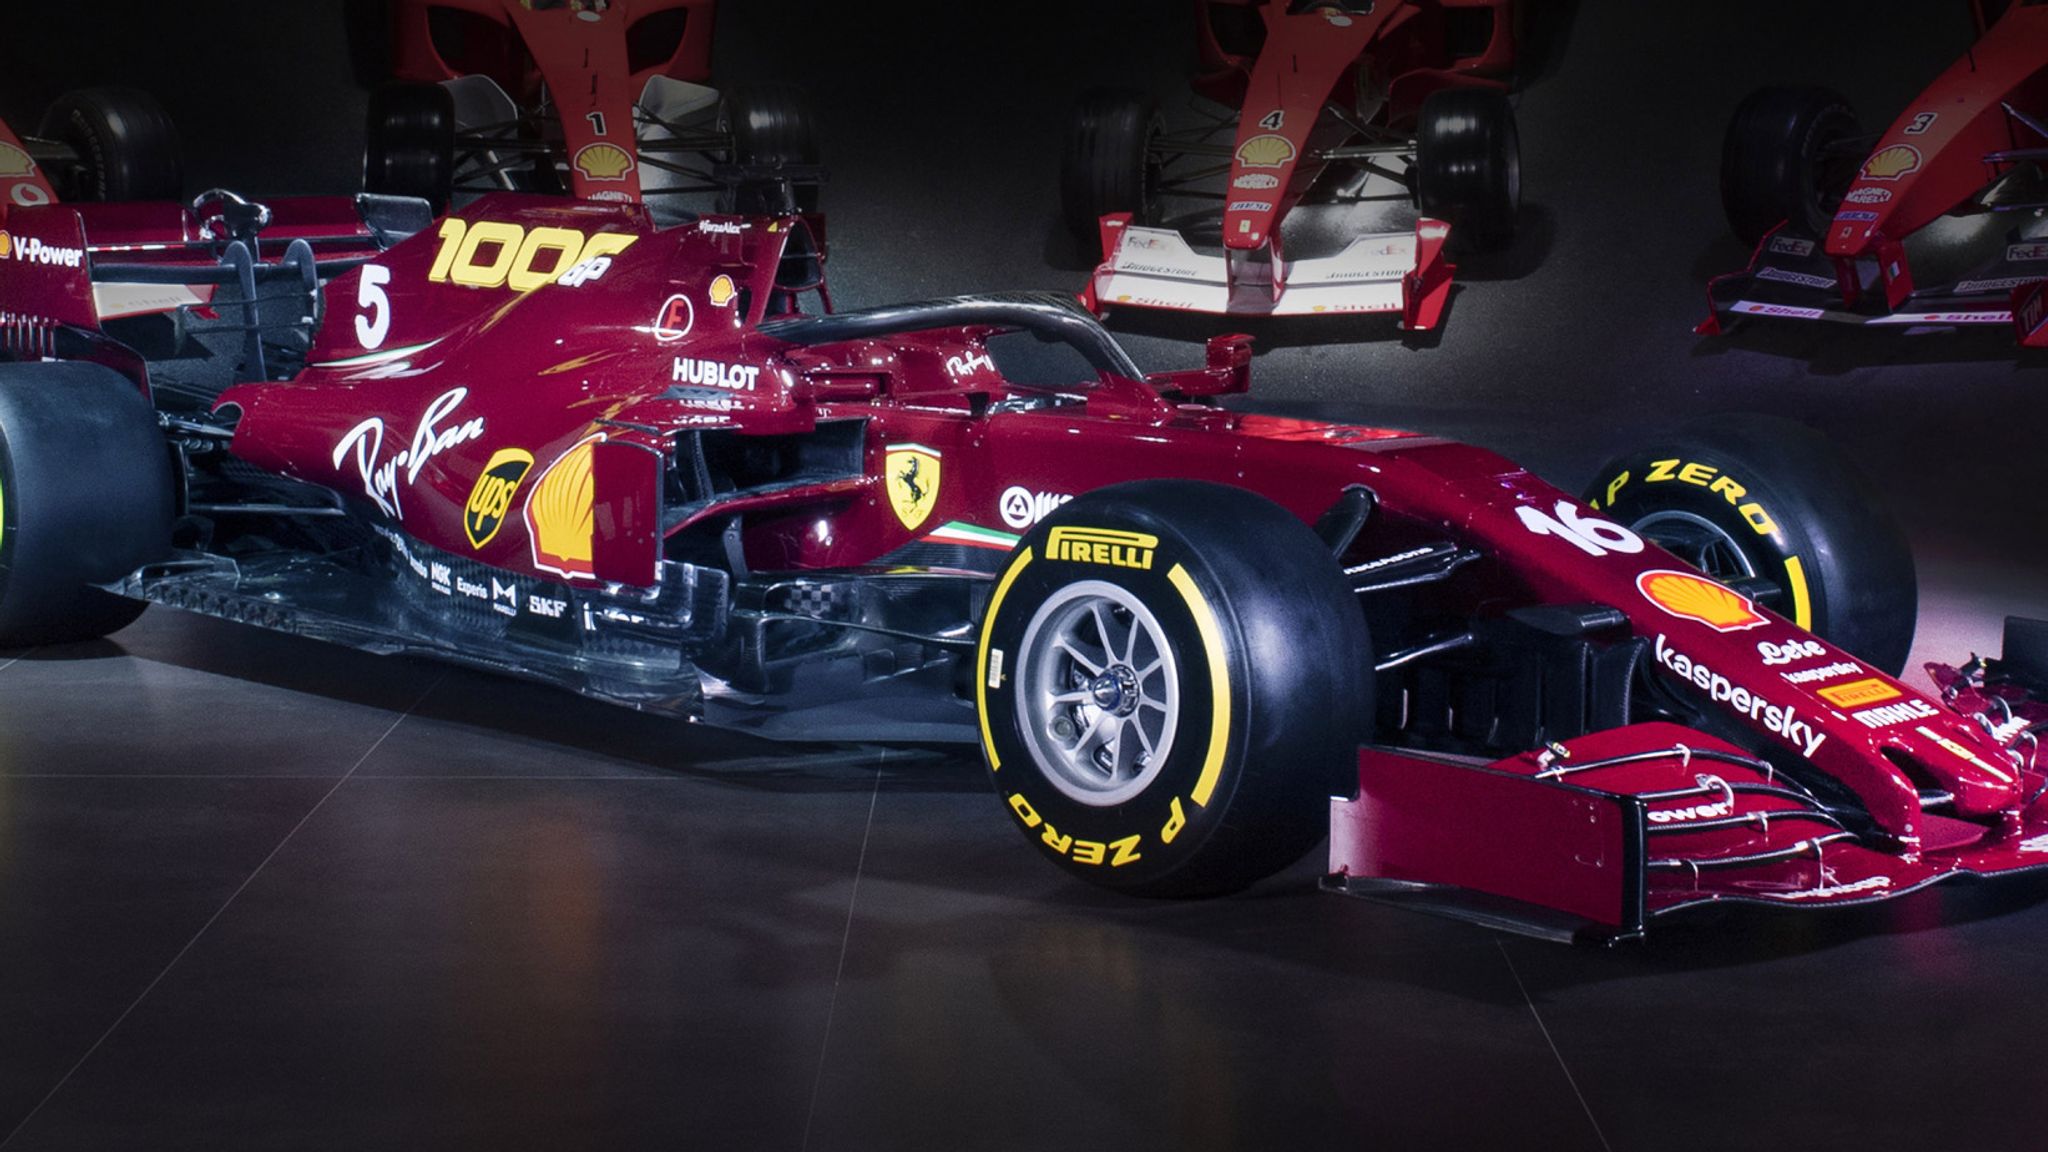 Ferrari to run in classic burgundy livery for 1000th race at Tuscan GP F1 News